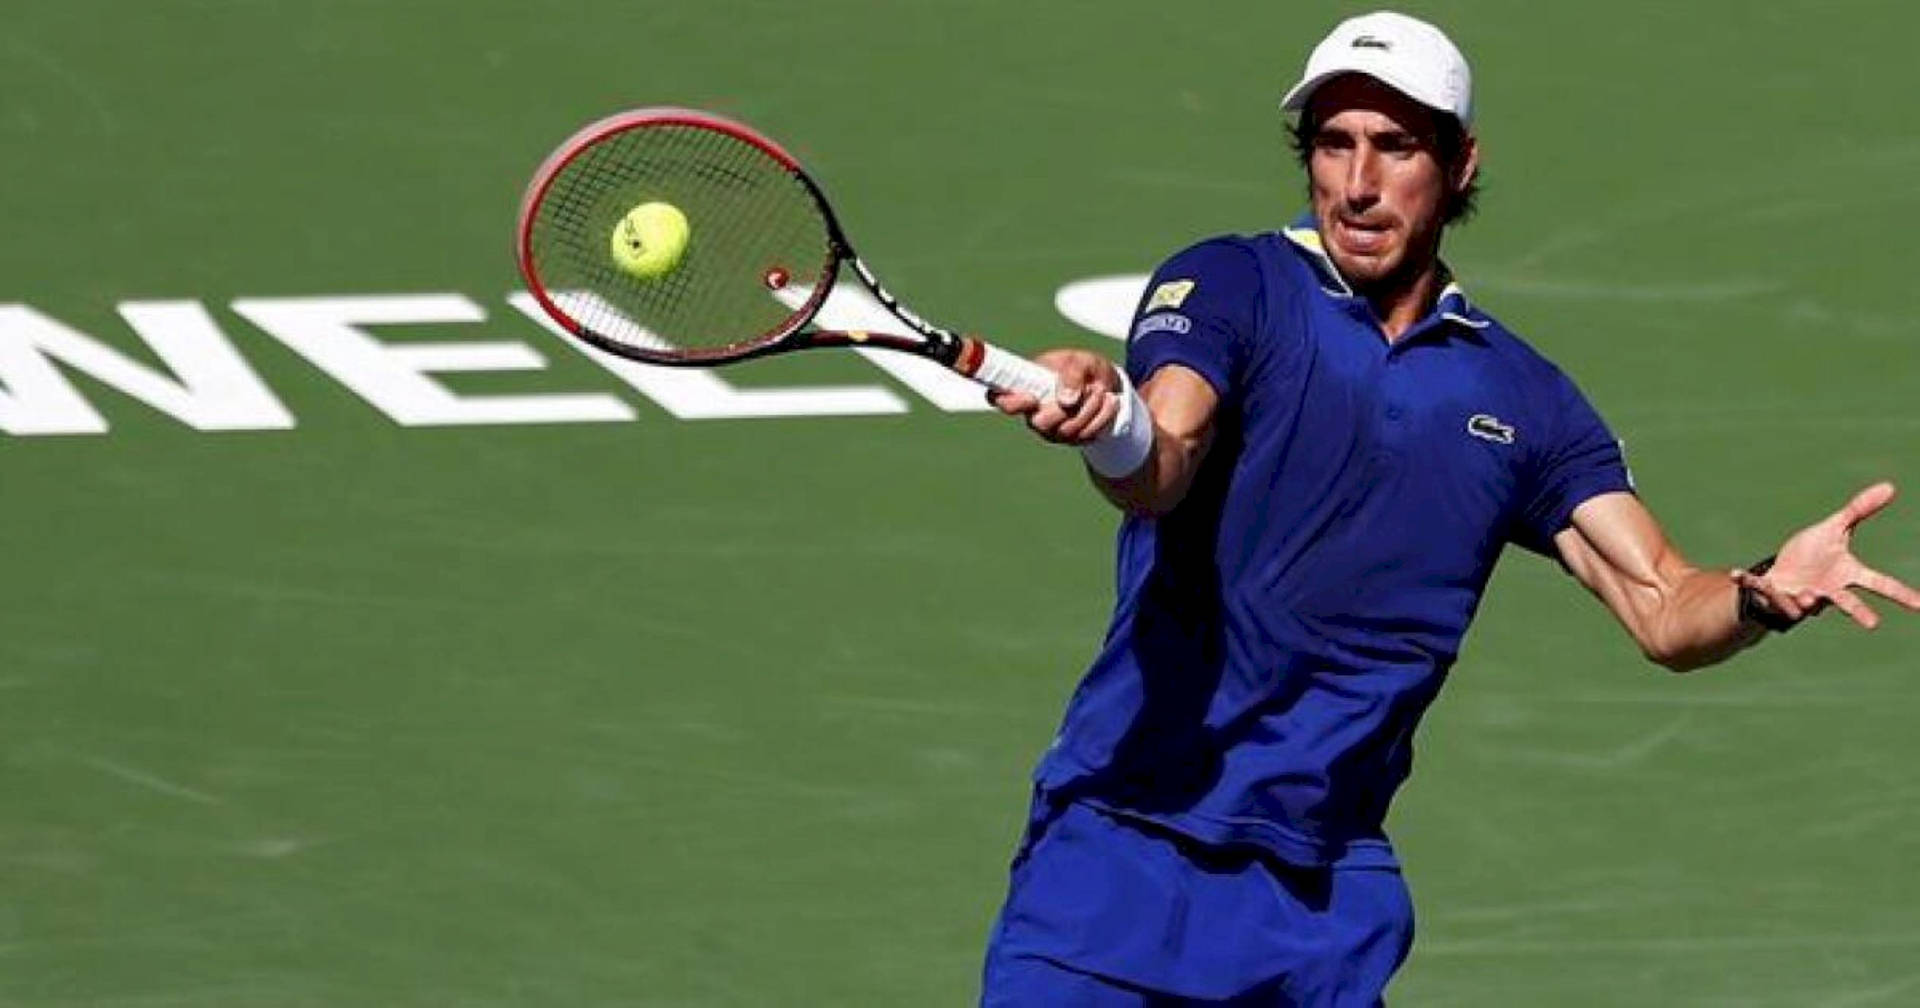 Pablocuevas Indian Wells Open Can Be Translated To Italian As 